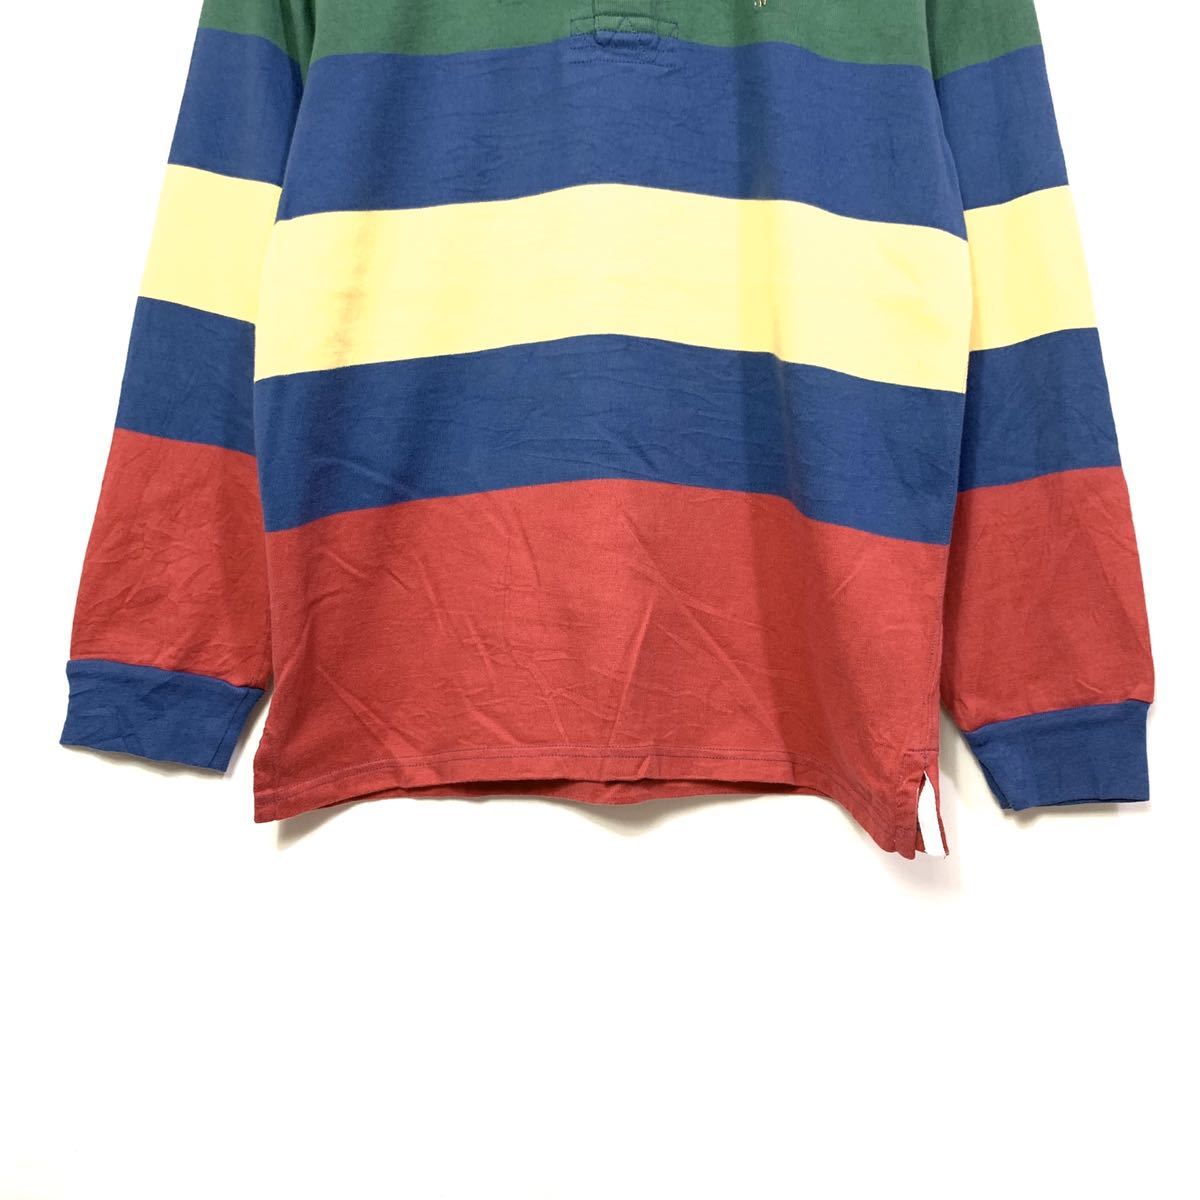 # for children Polo by Ralph Lauren Ralph Lauren futoshi pitch multi border long sleeve Rugger shirt old clothes American Casual polo-shirt size XL#